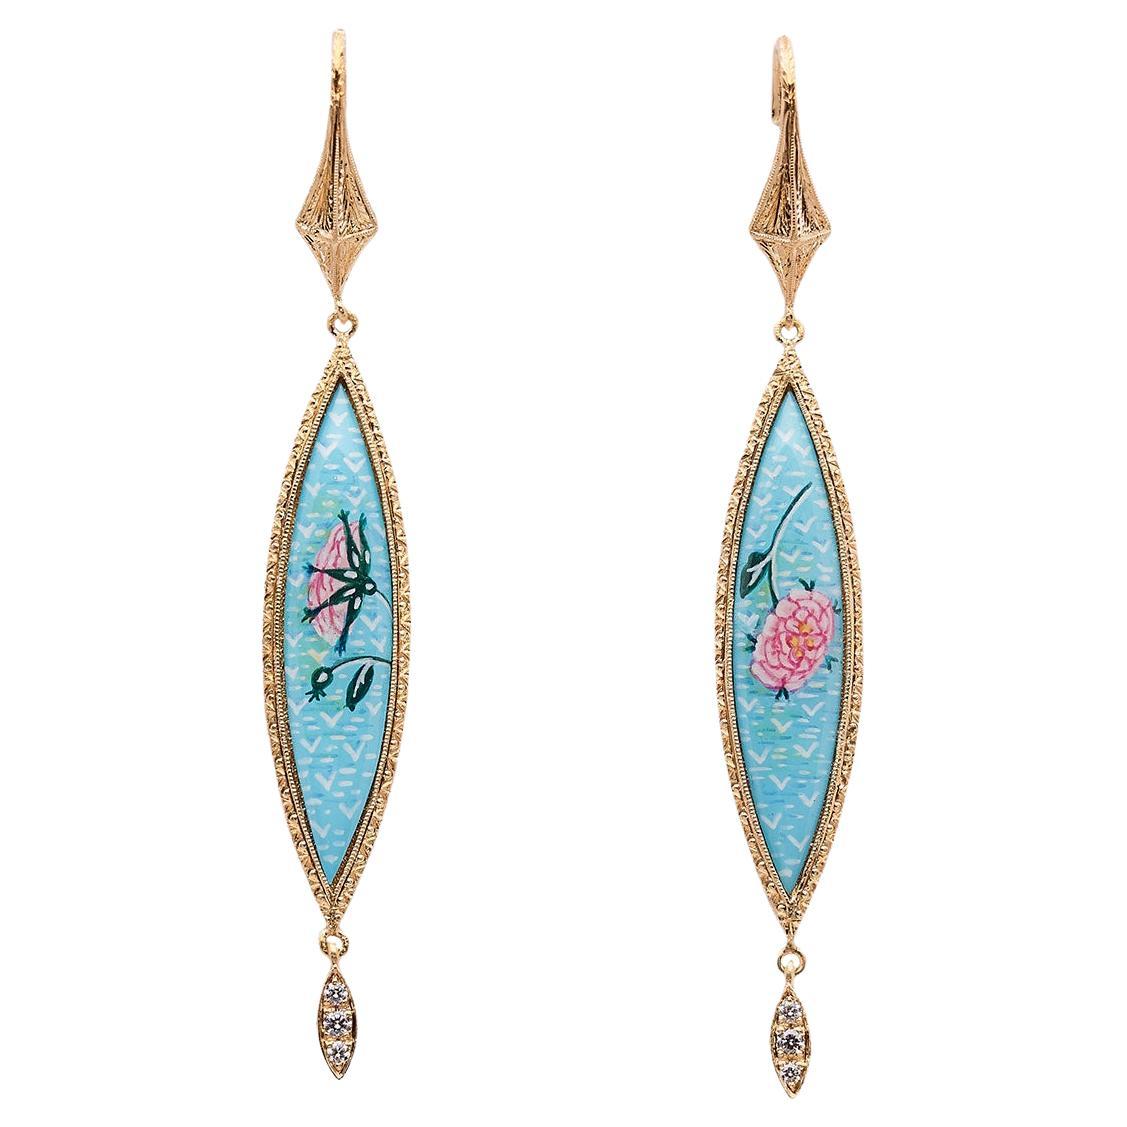 18kt gold earrings, Diamonds, engraved painted in miniature & enamelled by hands For Sale